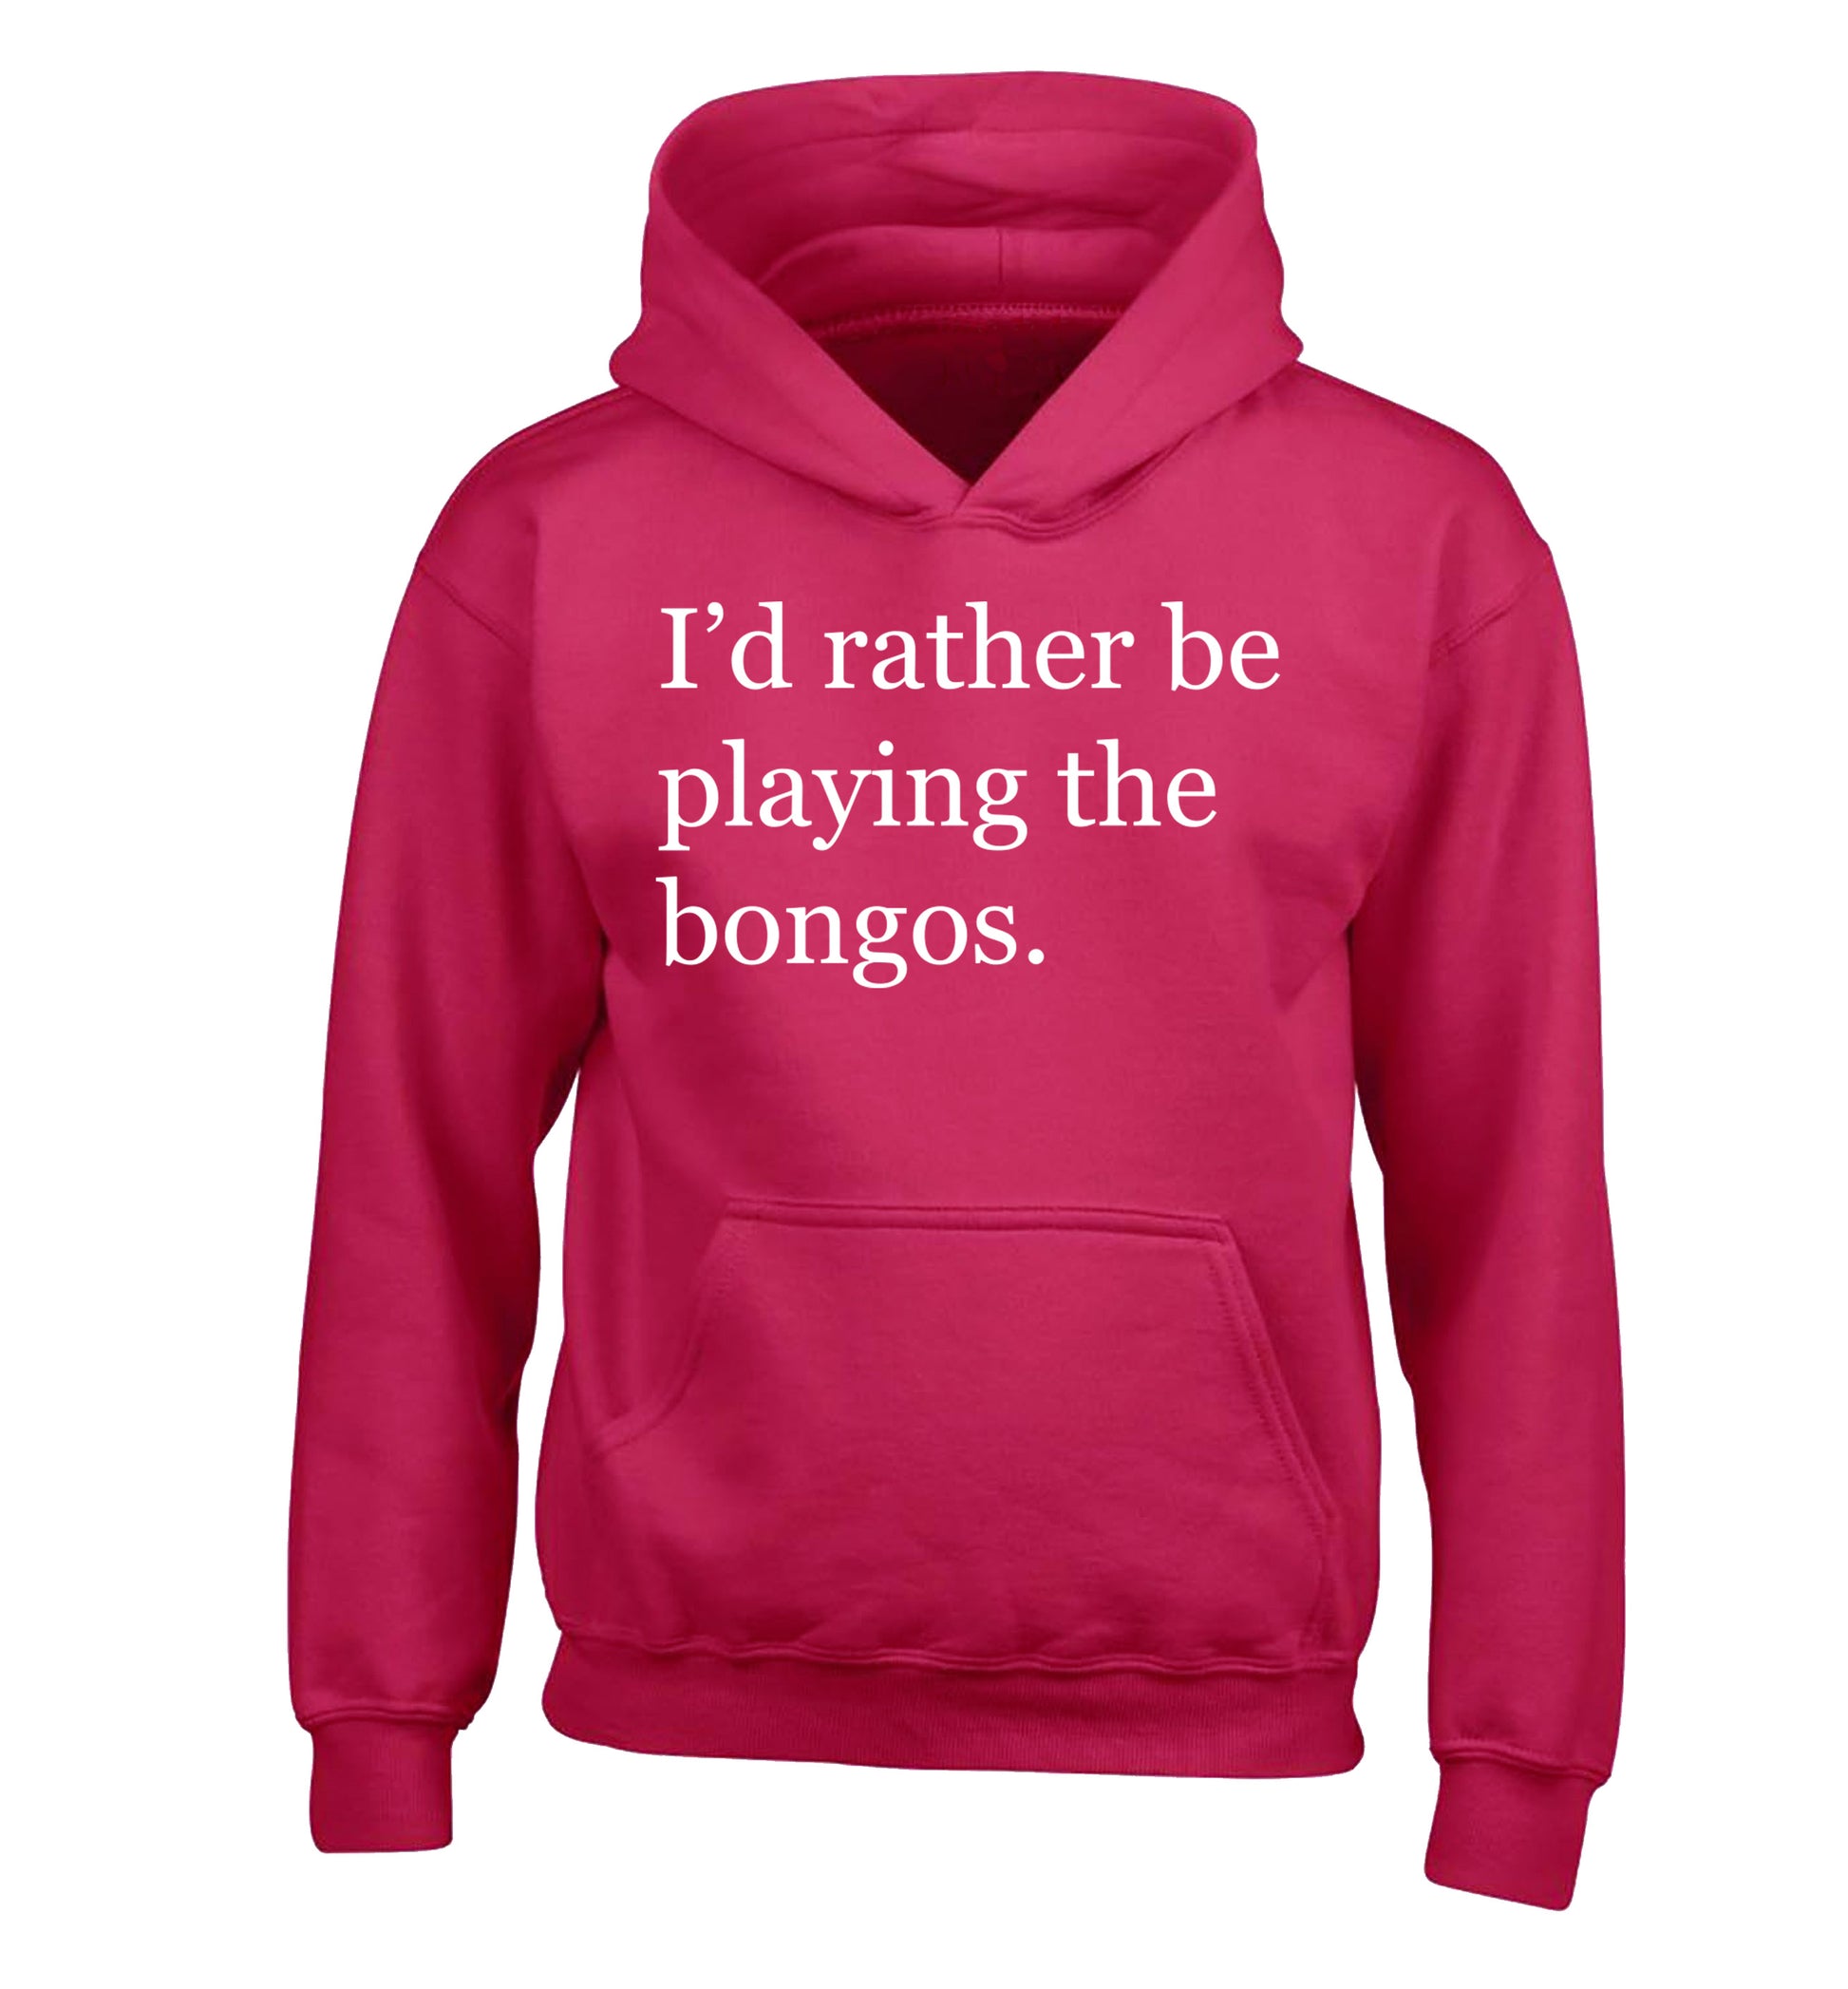 I'd rather be playing the bongos children's pink hoodie 12-14 Years